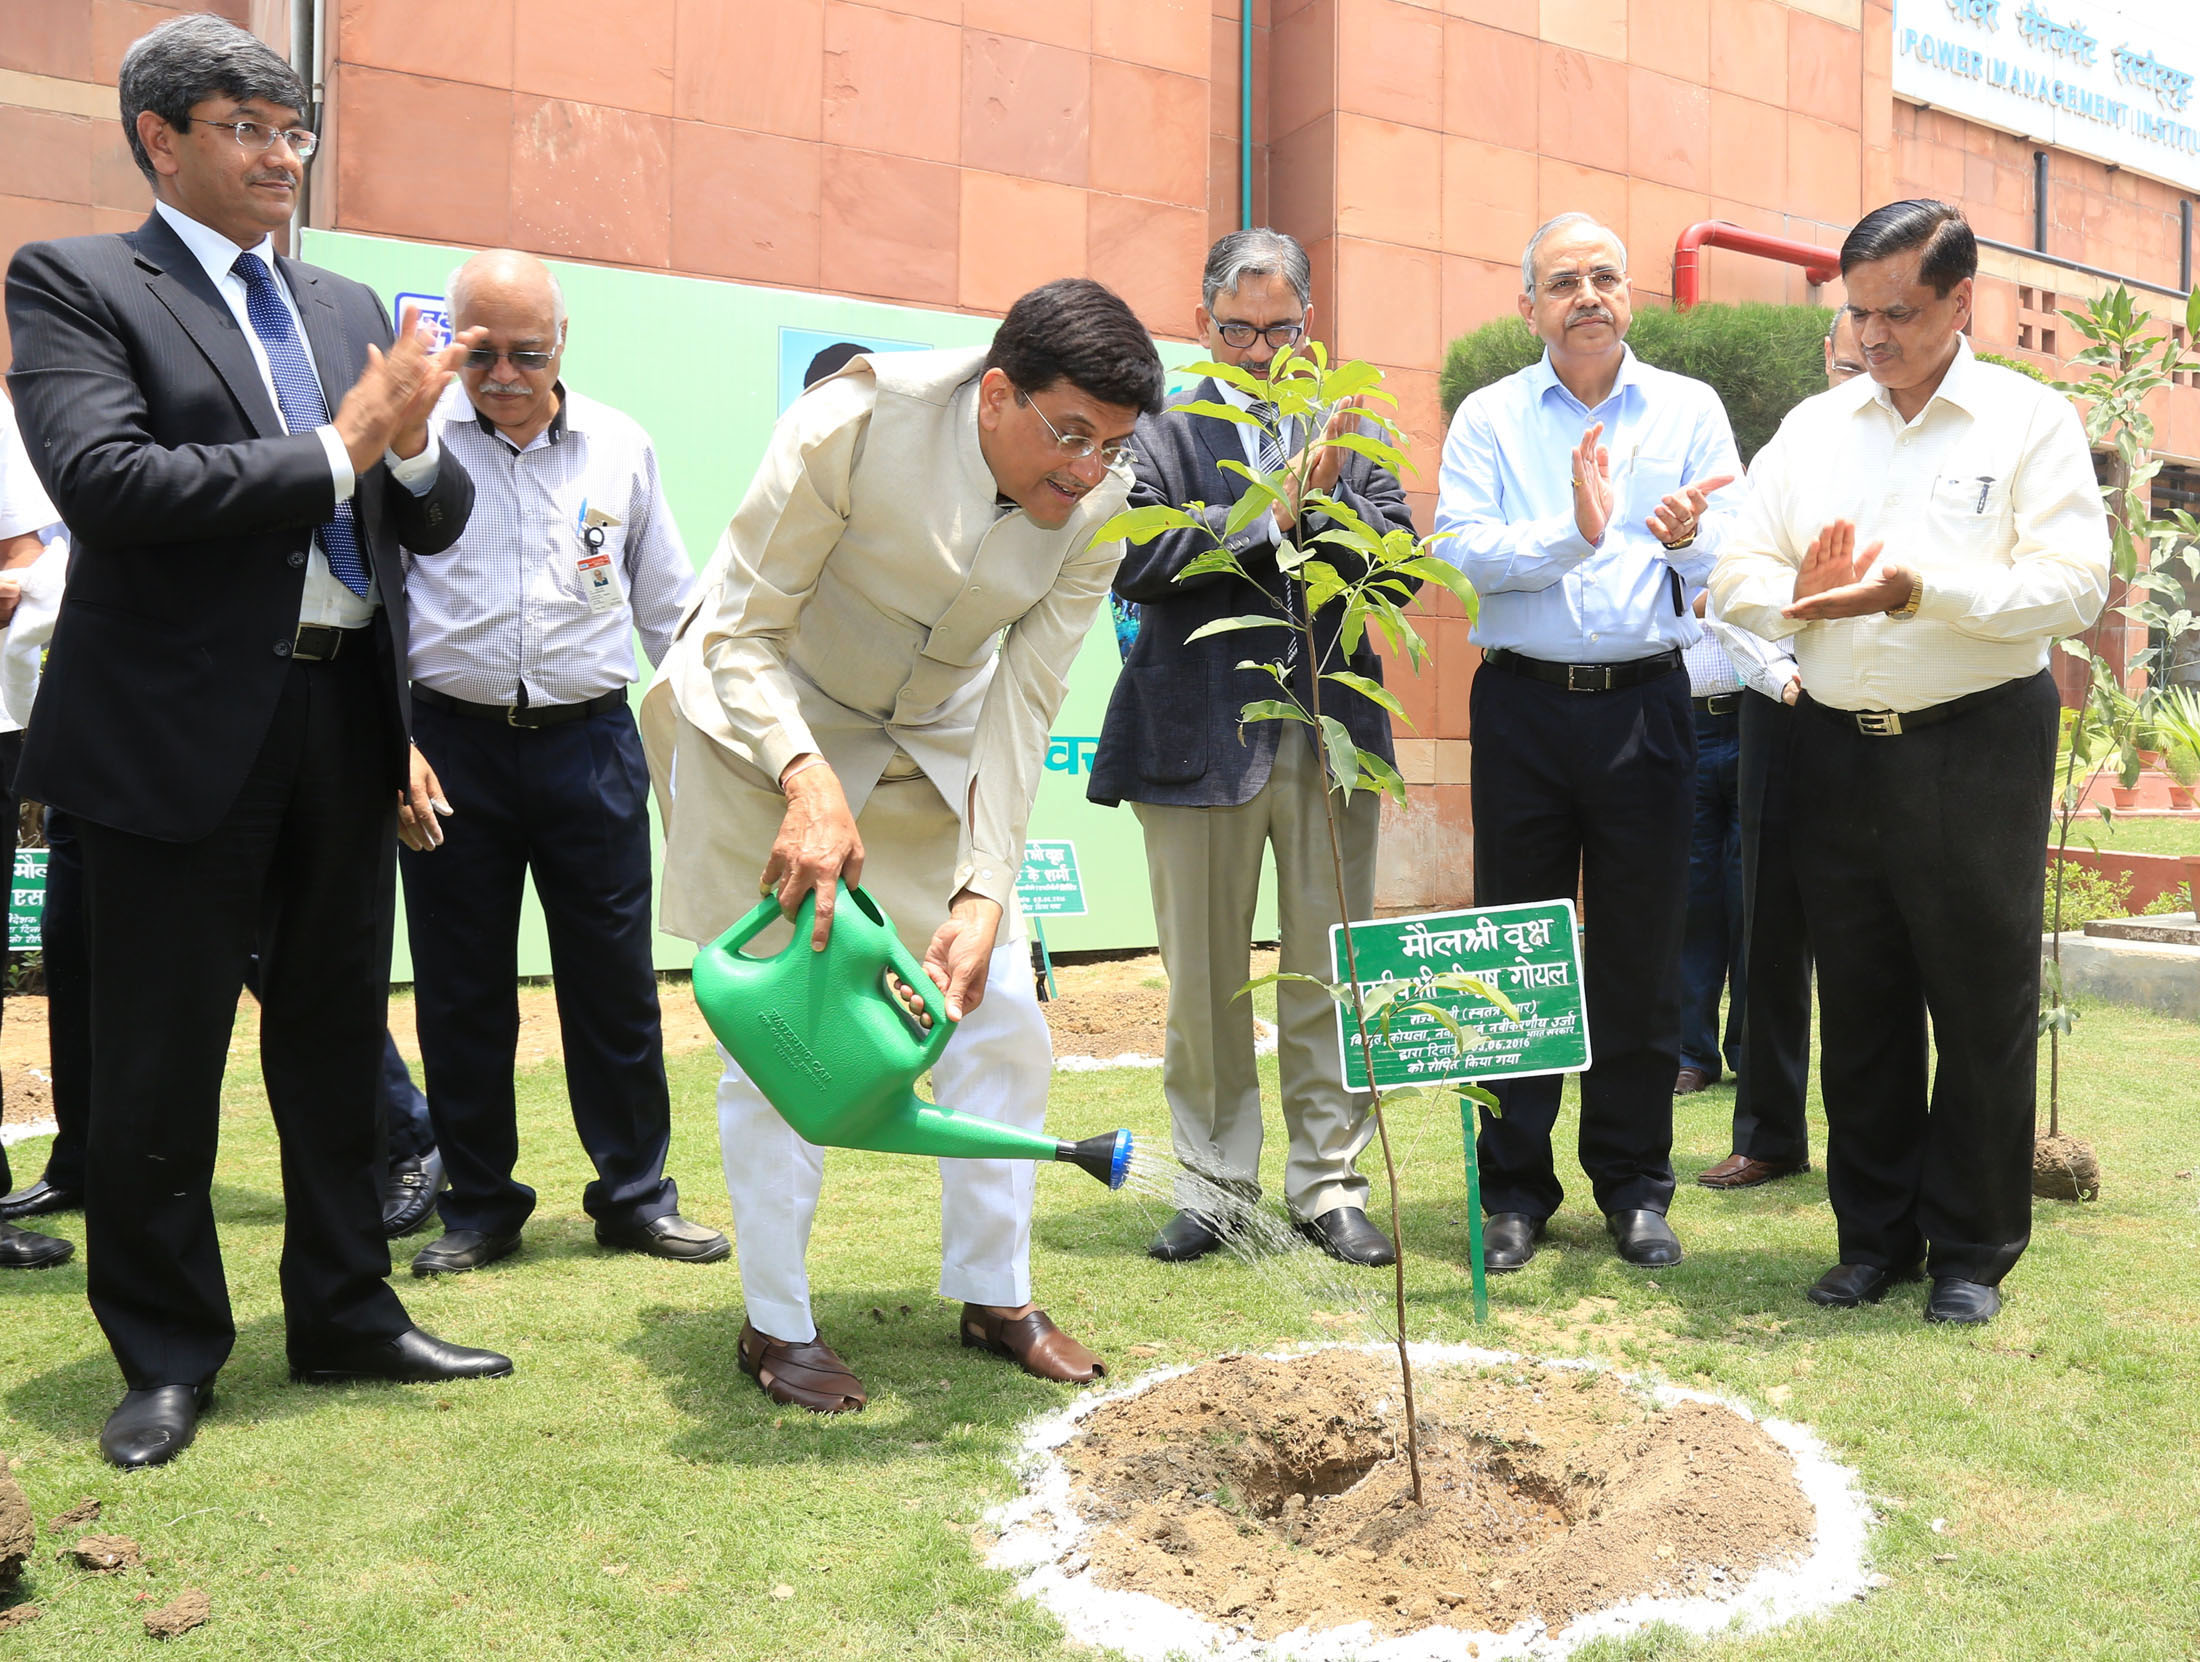 The Minister of State (Independent Charge) for Power, Coal and New and Renewable Energy, Shri Piyush Goyal planting a sapling during the World Environment Day celebrations, at NTPC, Noida, Uttar Pradesh on June 03, 2016.